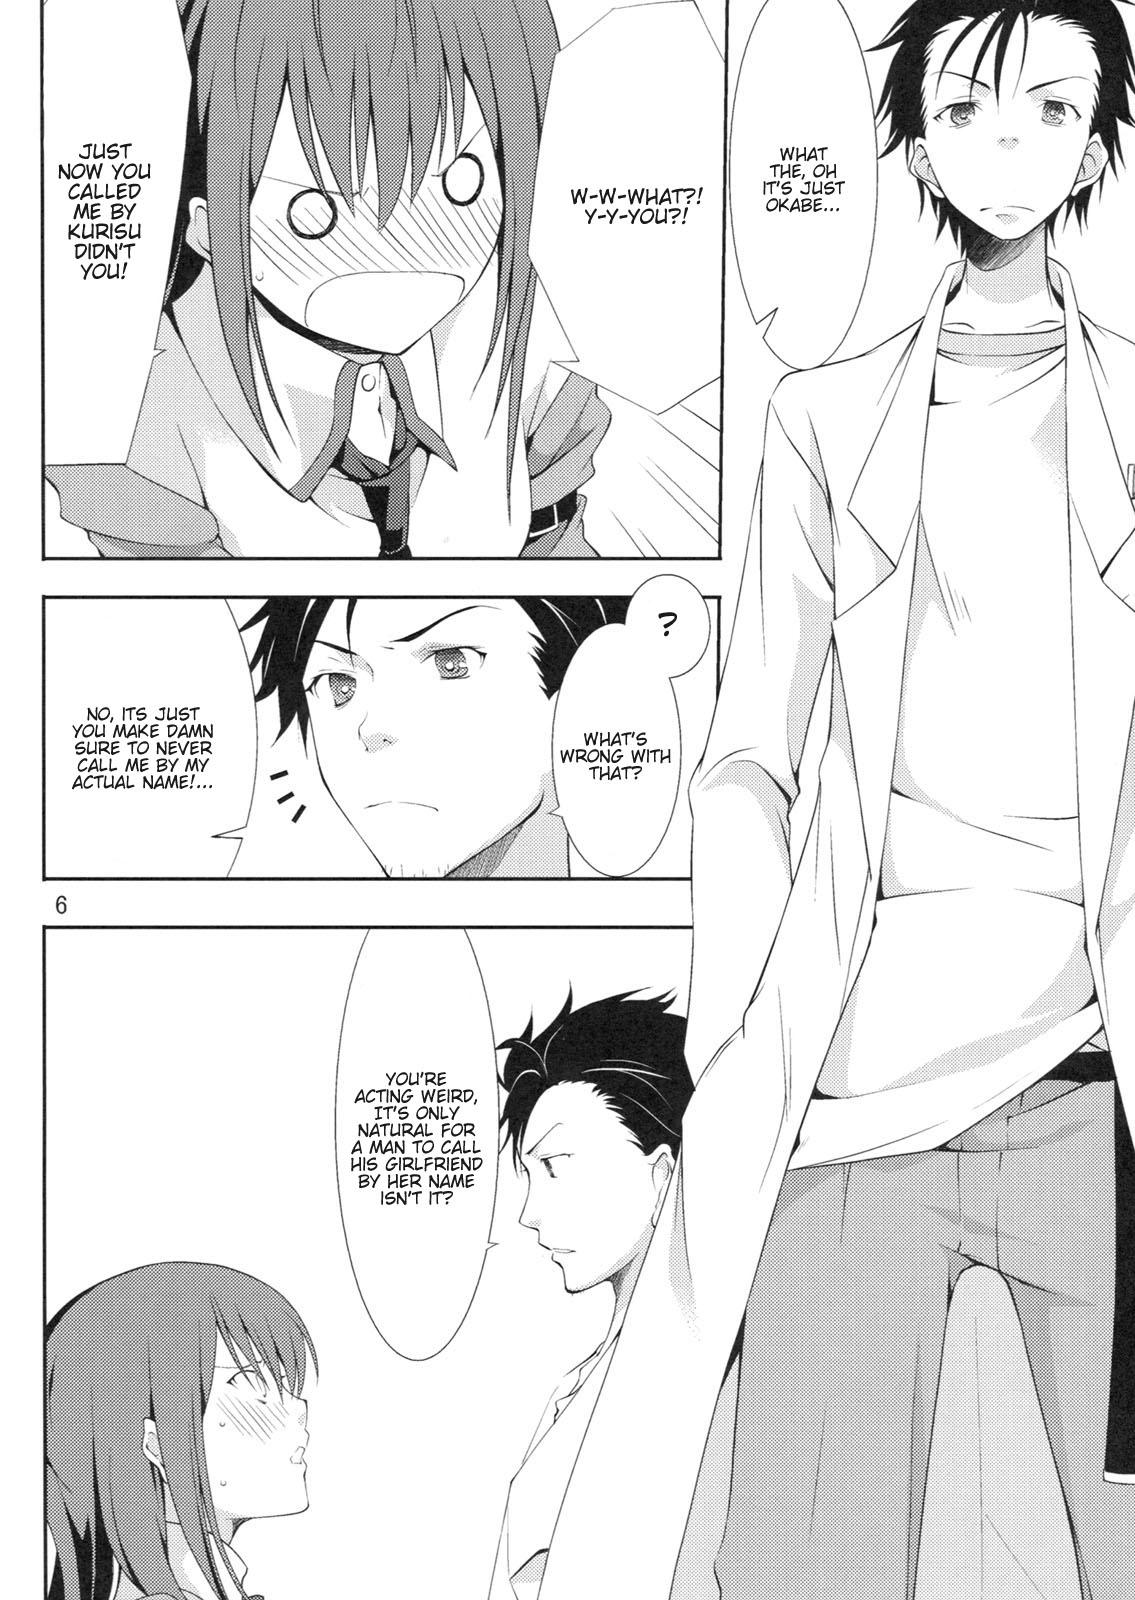 Sucking Dicks Embrace - Steinsgate Tease - Page 6